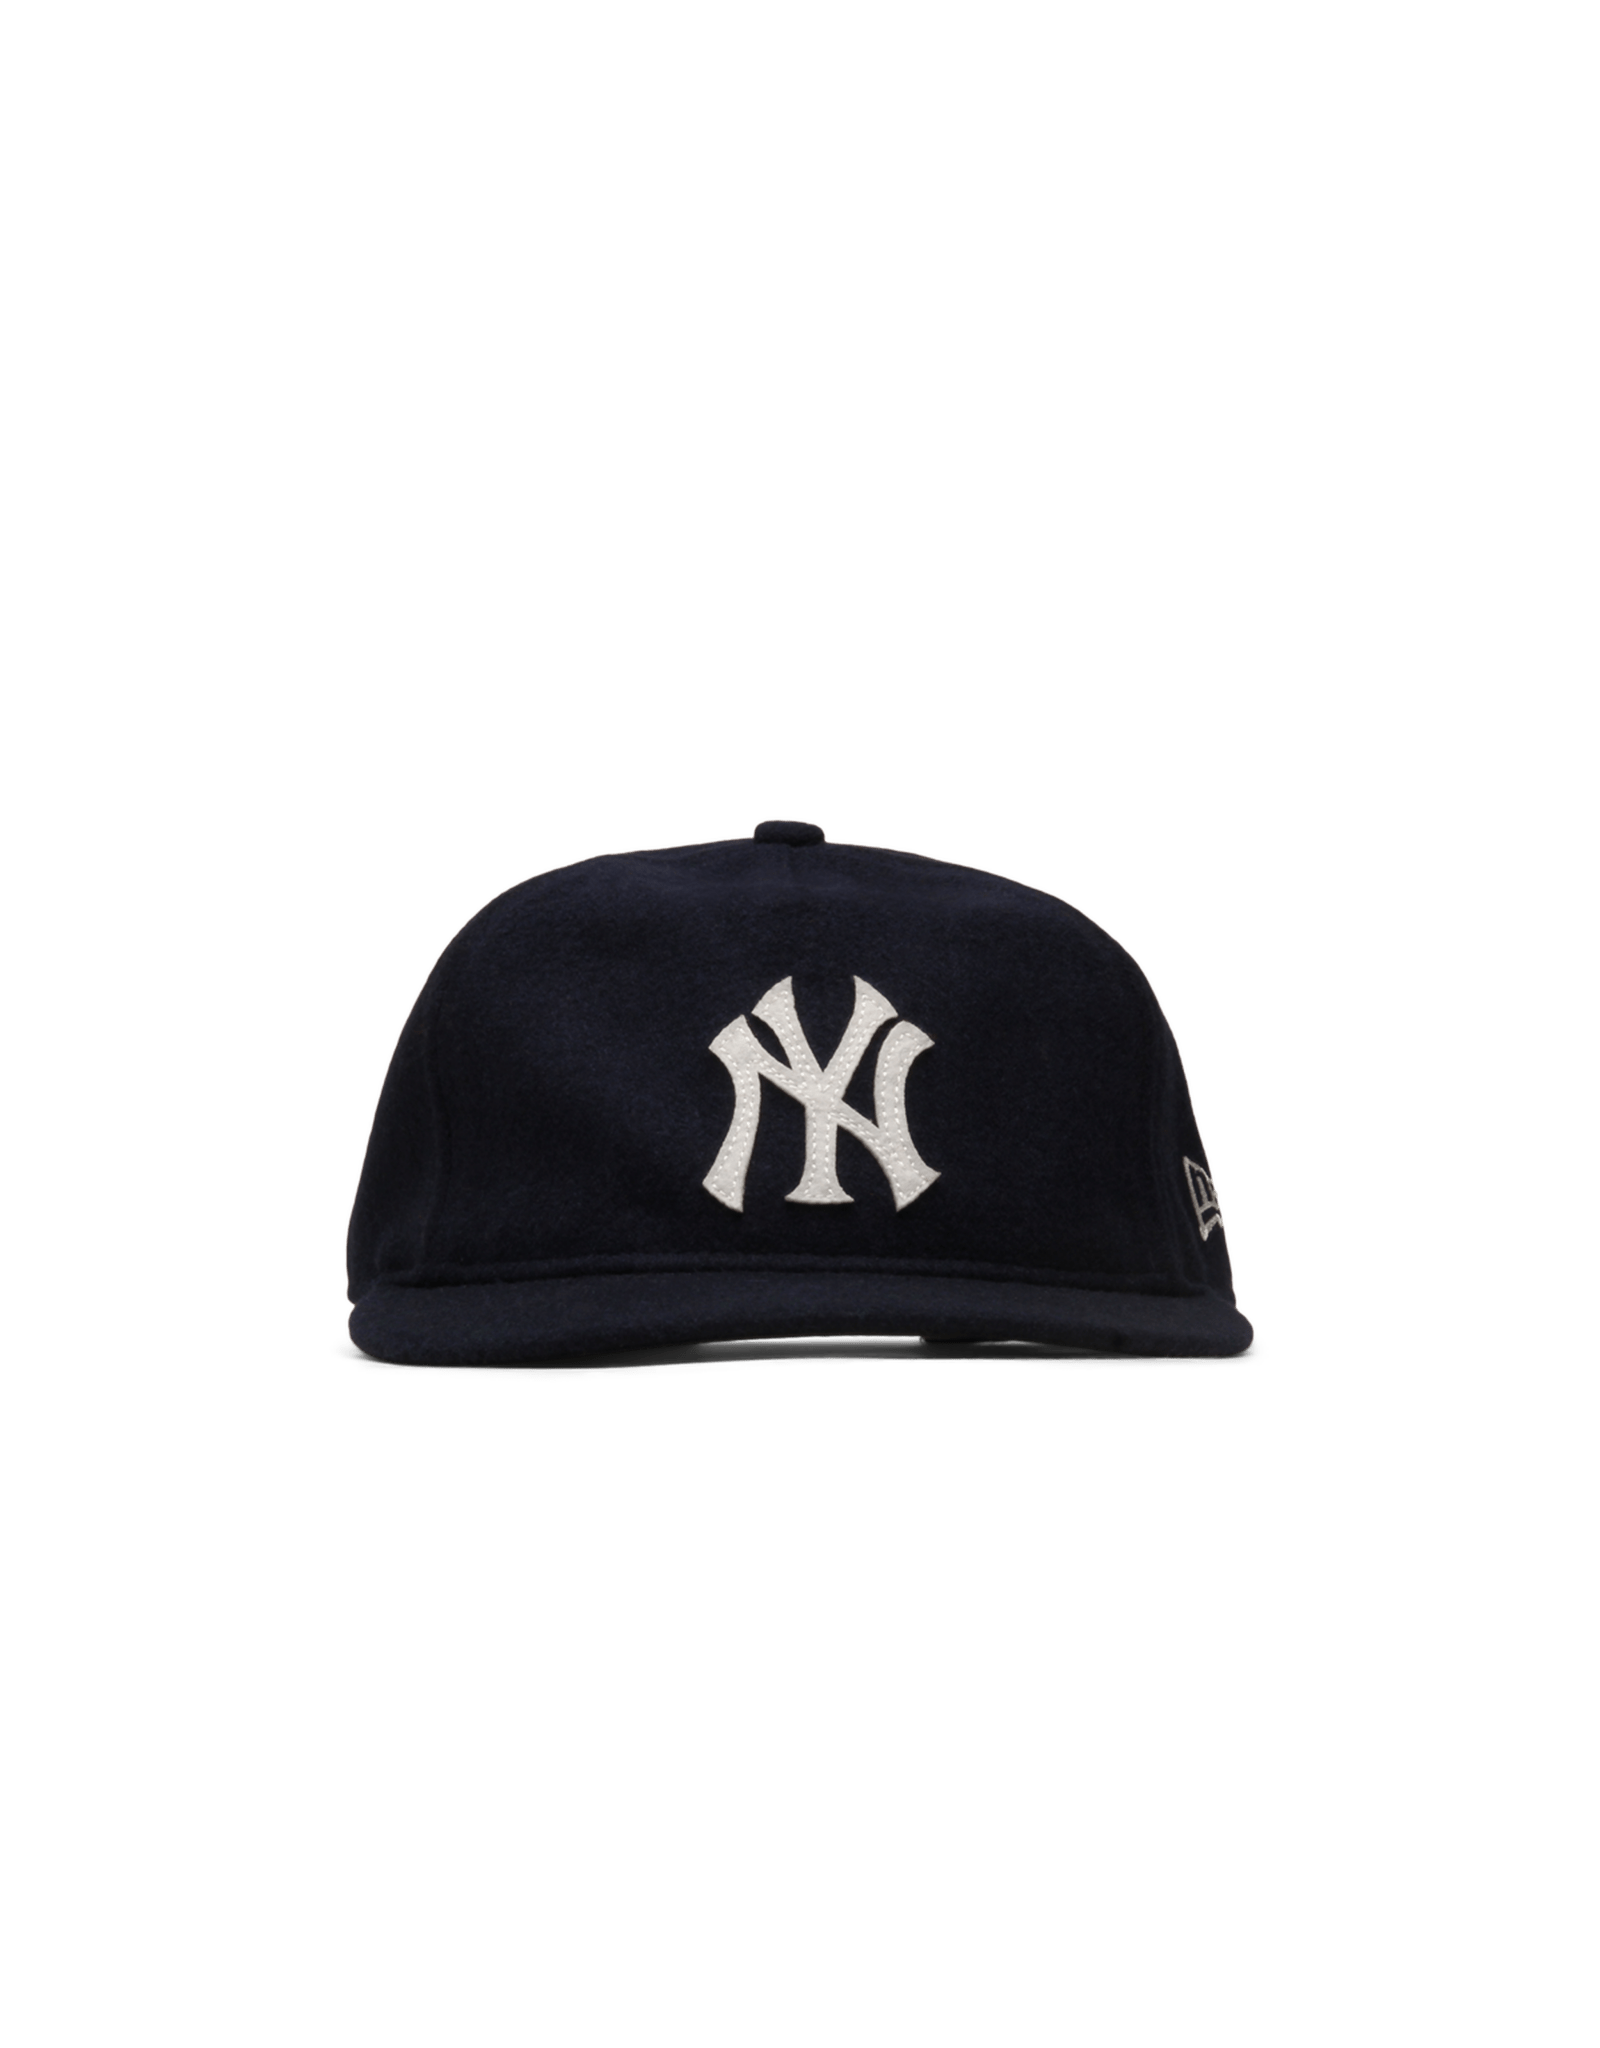 NY Yankees Cooperstown Adjustable Cap